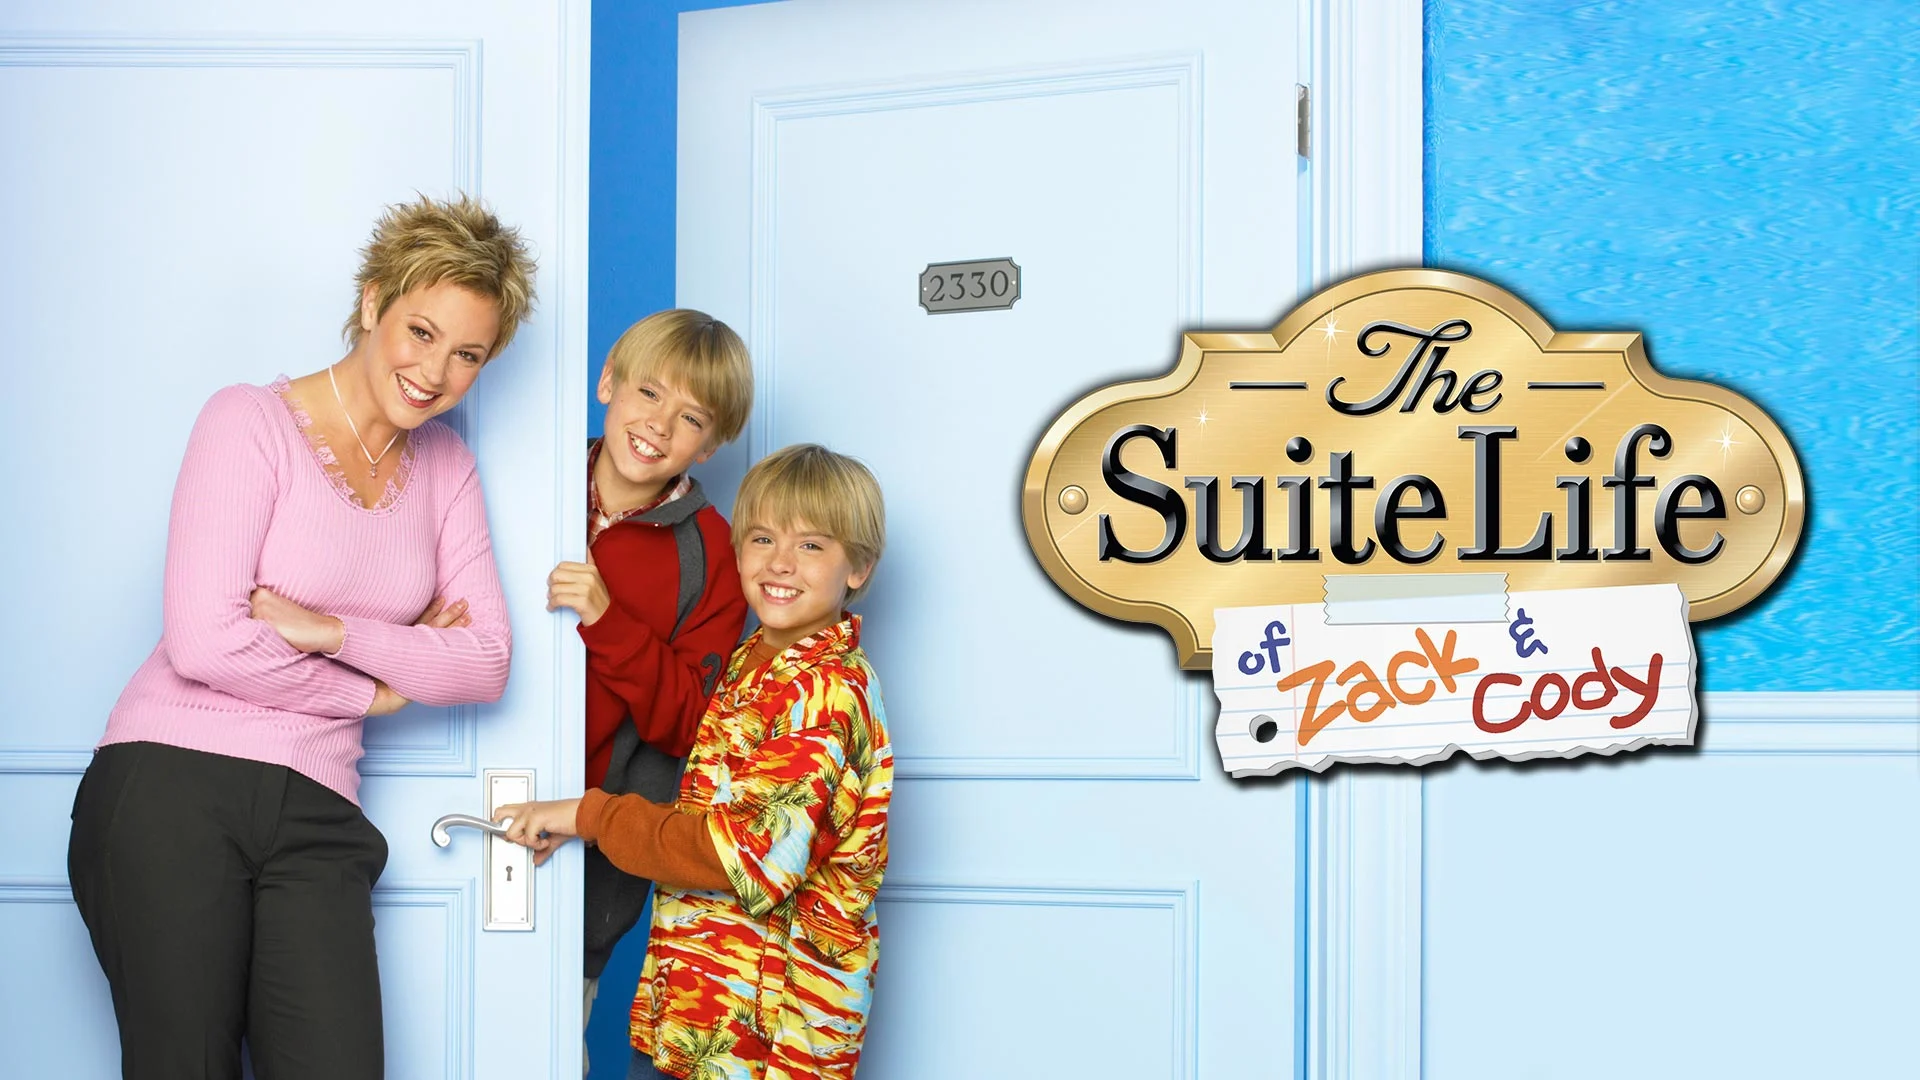 The Suite Life's Popularity